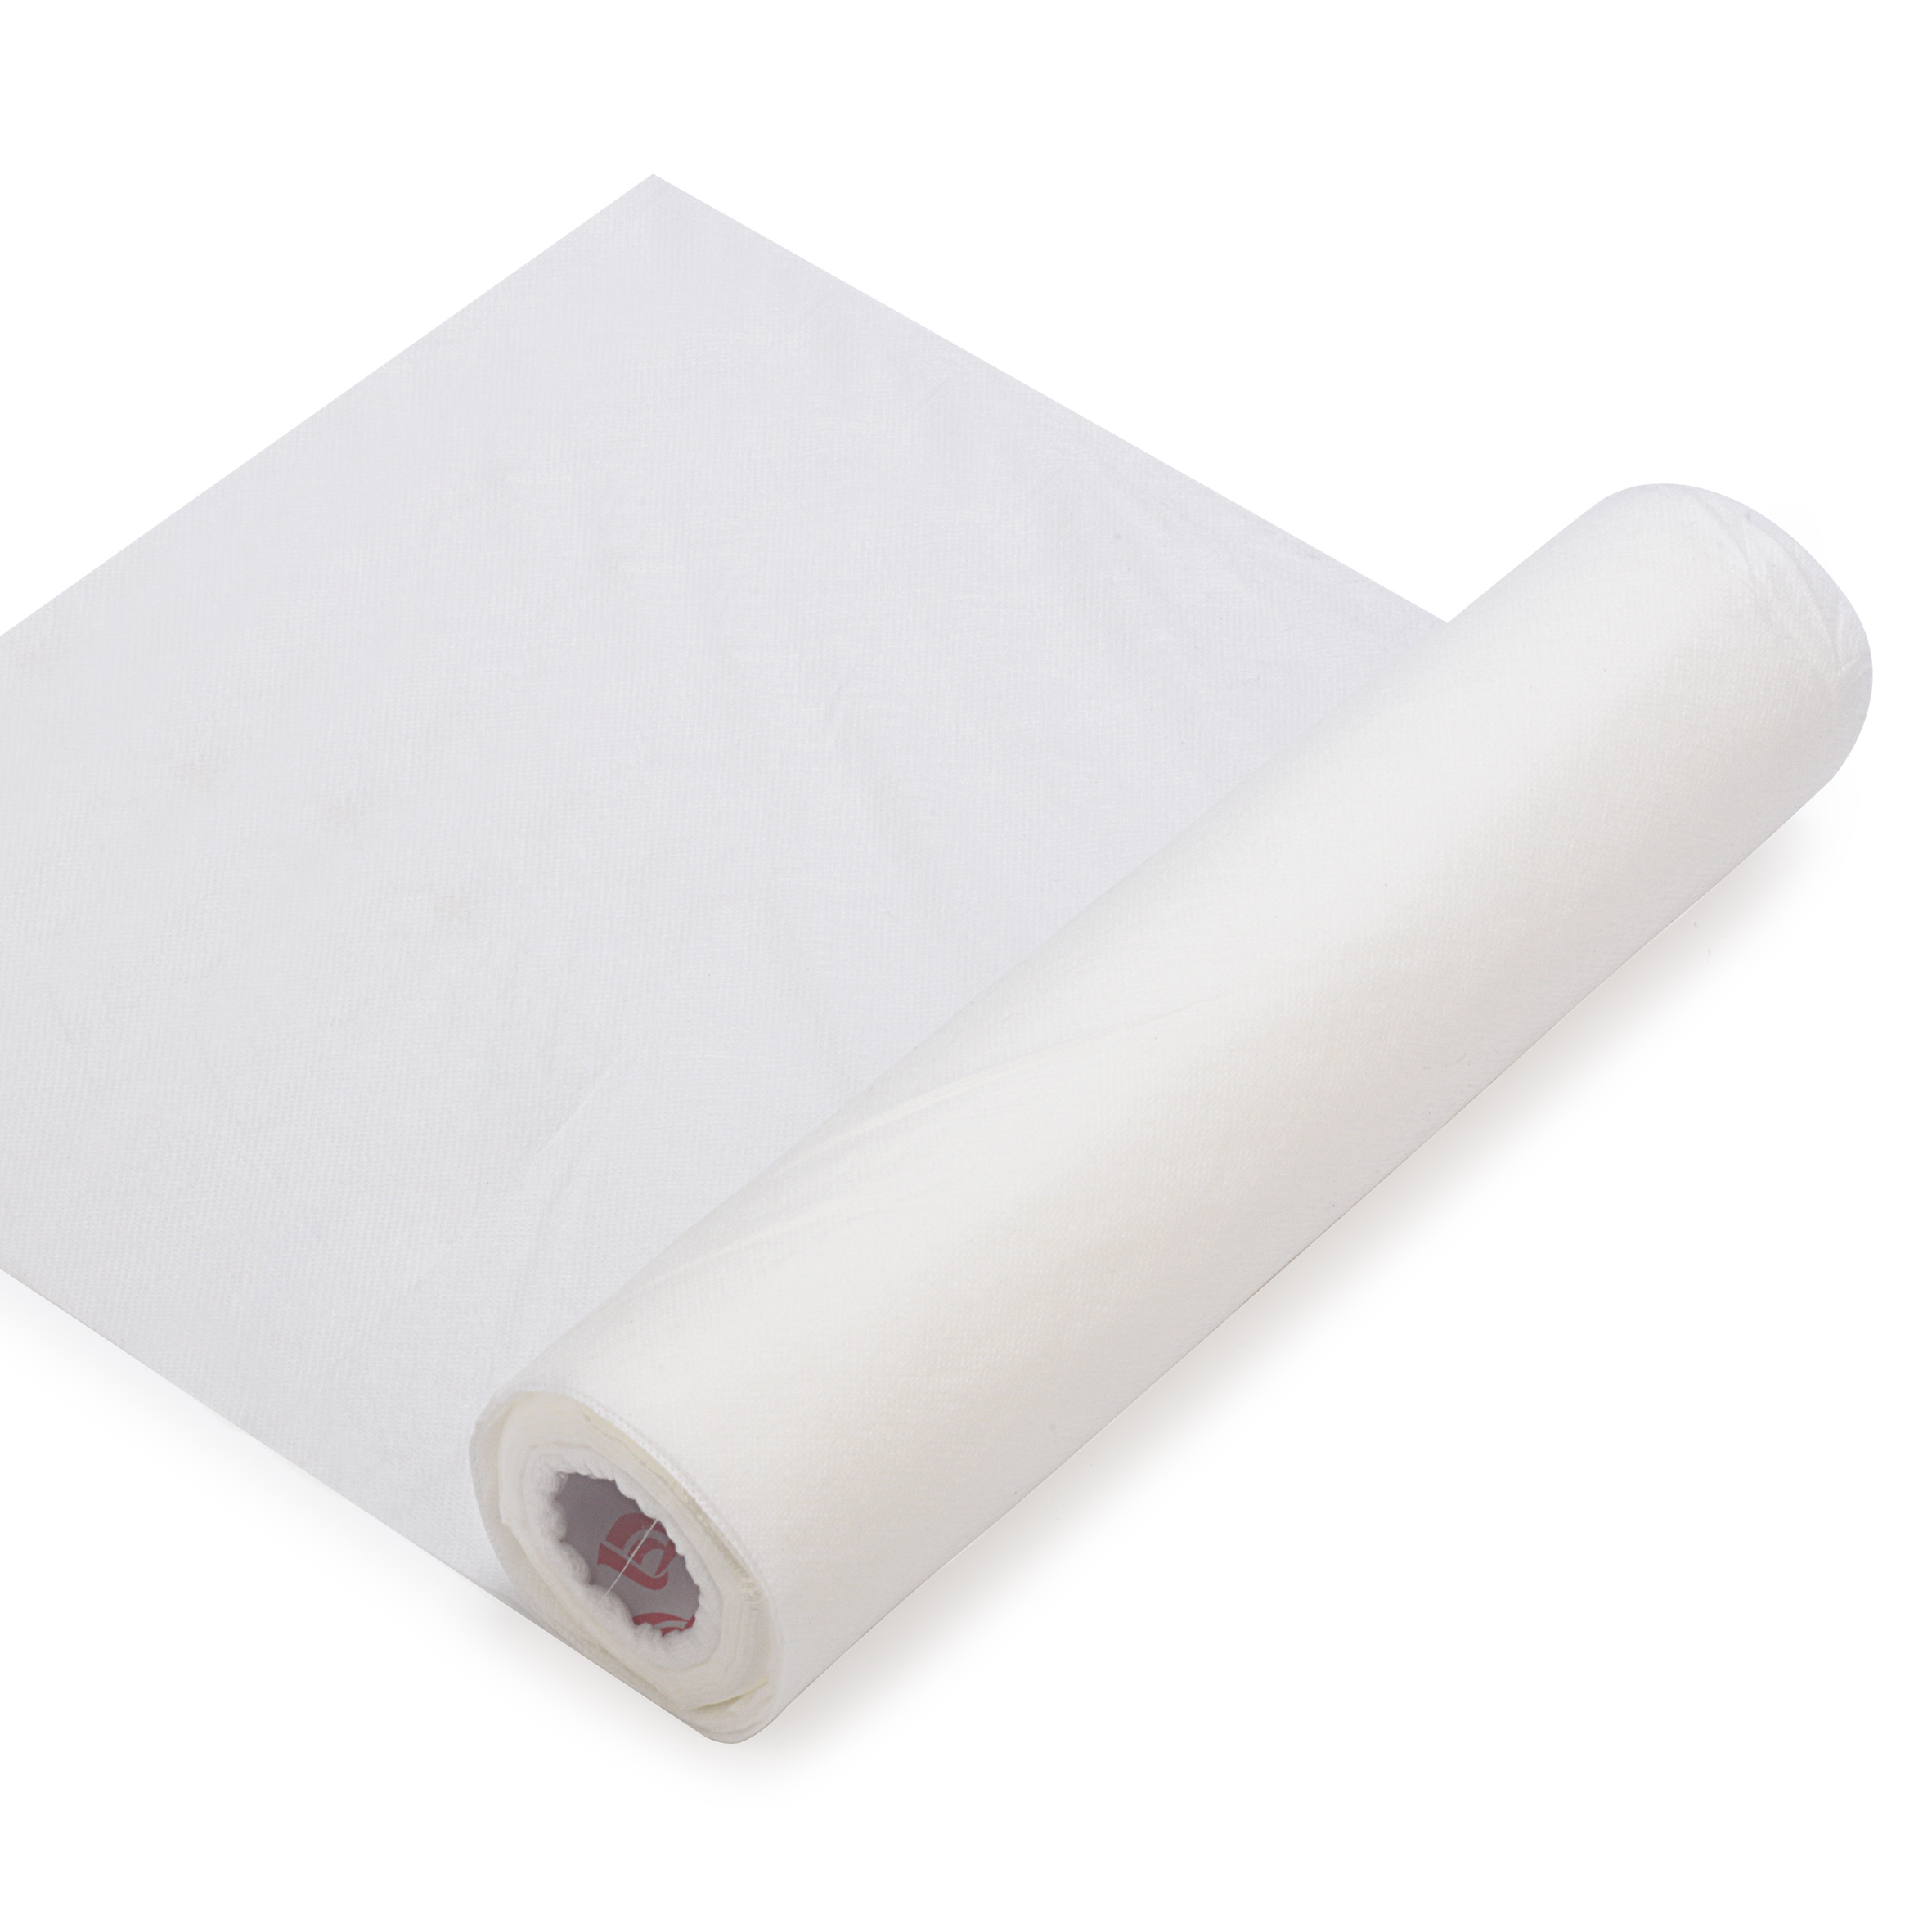 Simthread Water-soluble Embroidery Stabilizer Fabric - 40GSM 30CMx10 Yds for FSL, Embroidery on Towel / Velvet / Corduroy